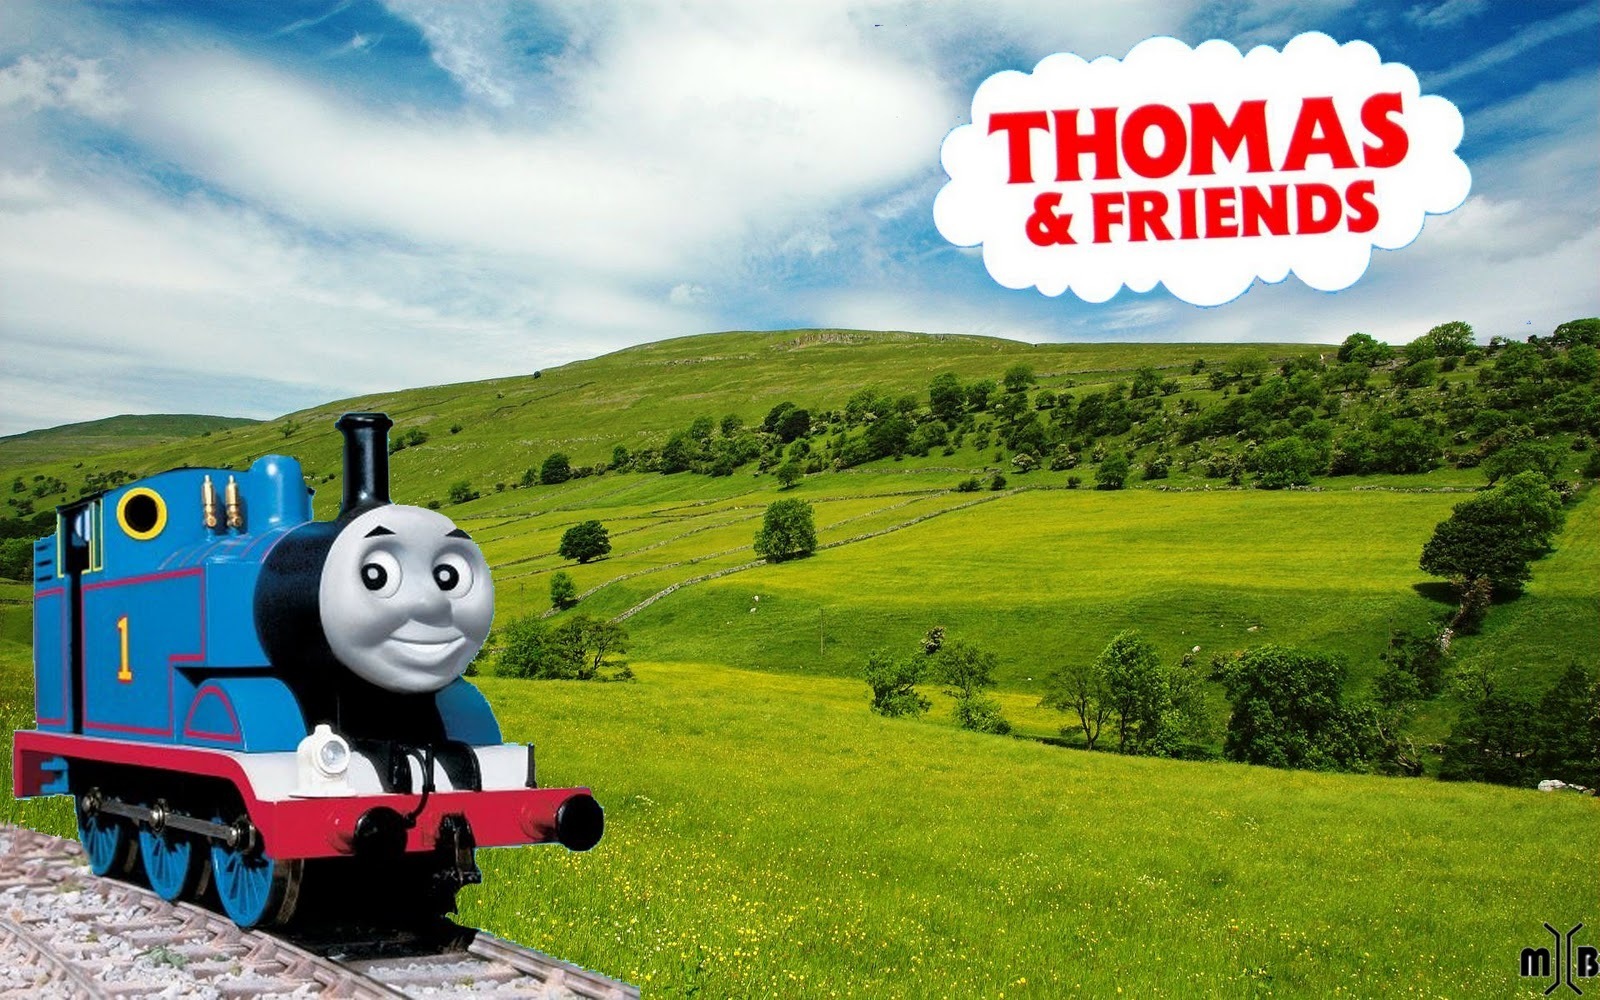 Thomas And Friends Wallpaper   Thomas And Friends Wallpaper 21400813 1600x1000